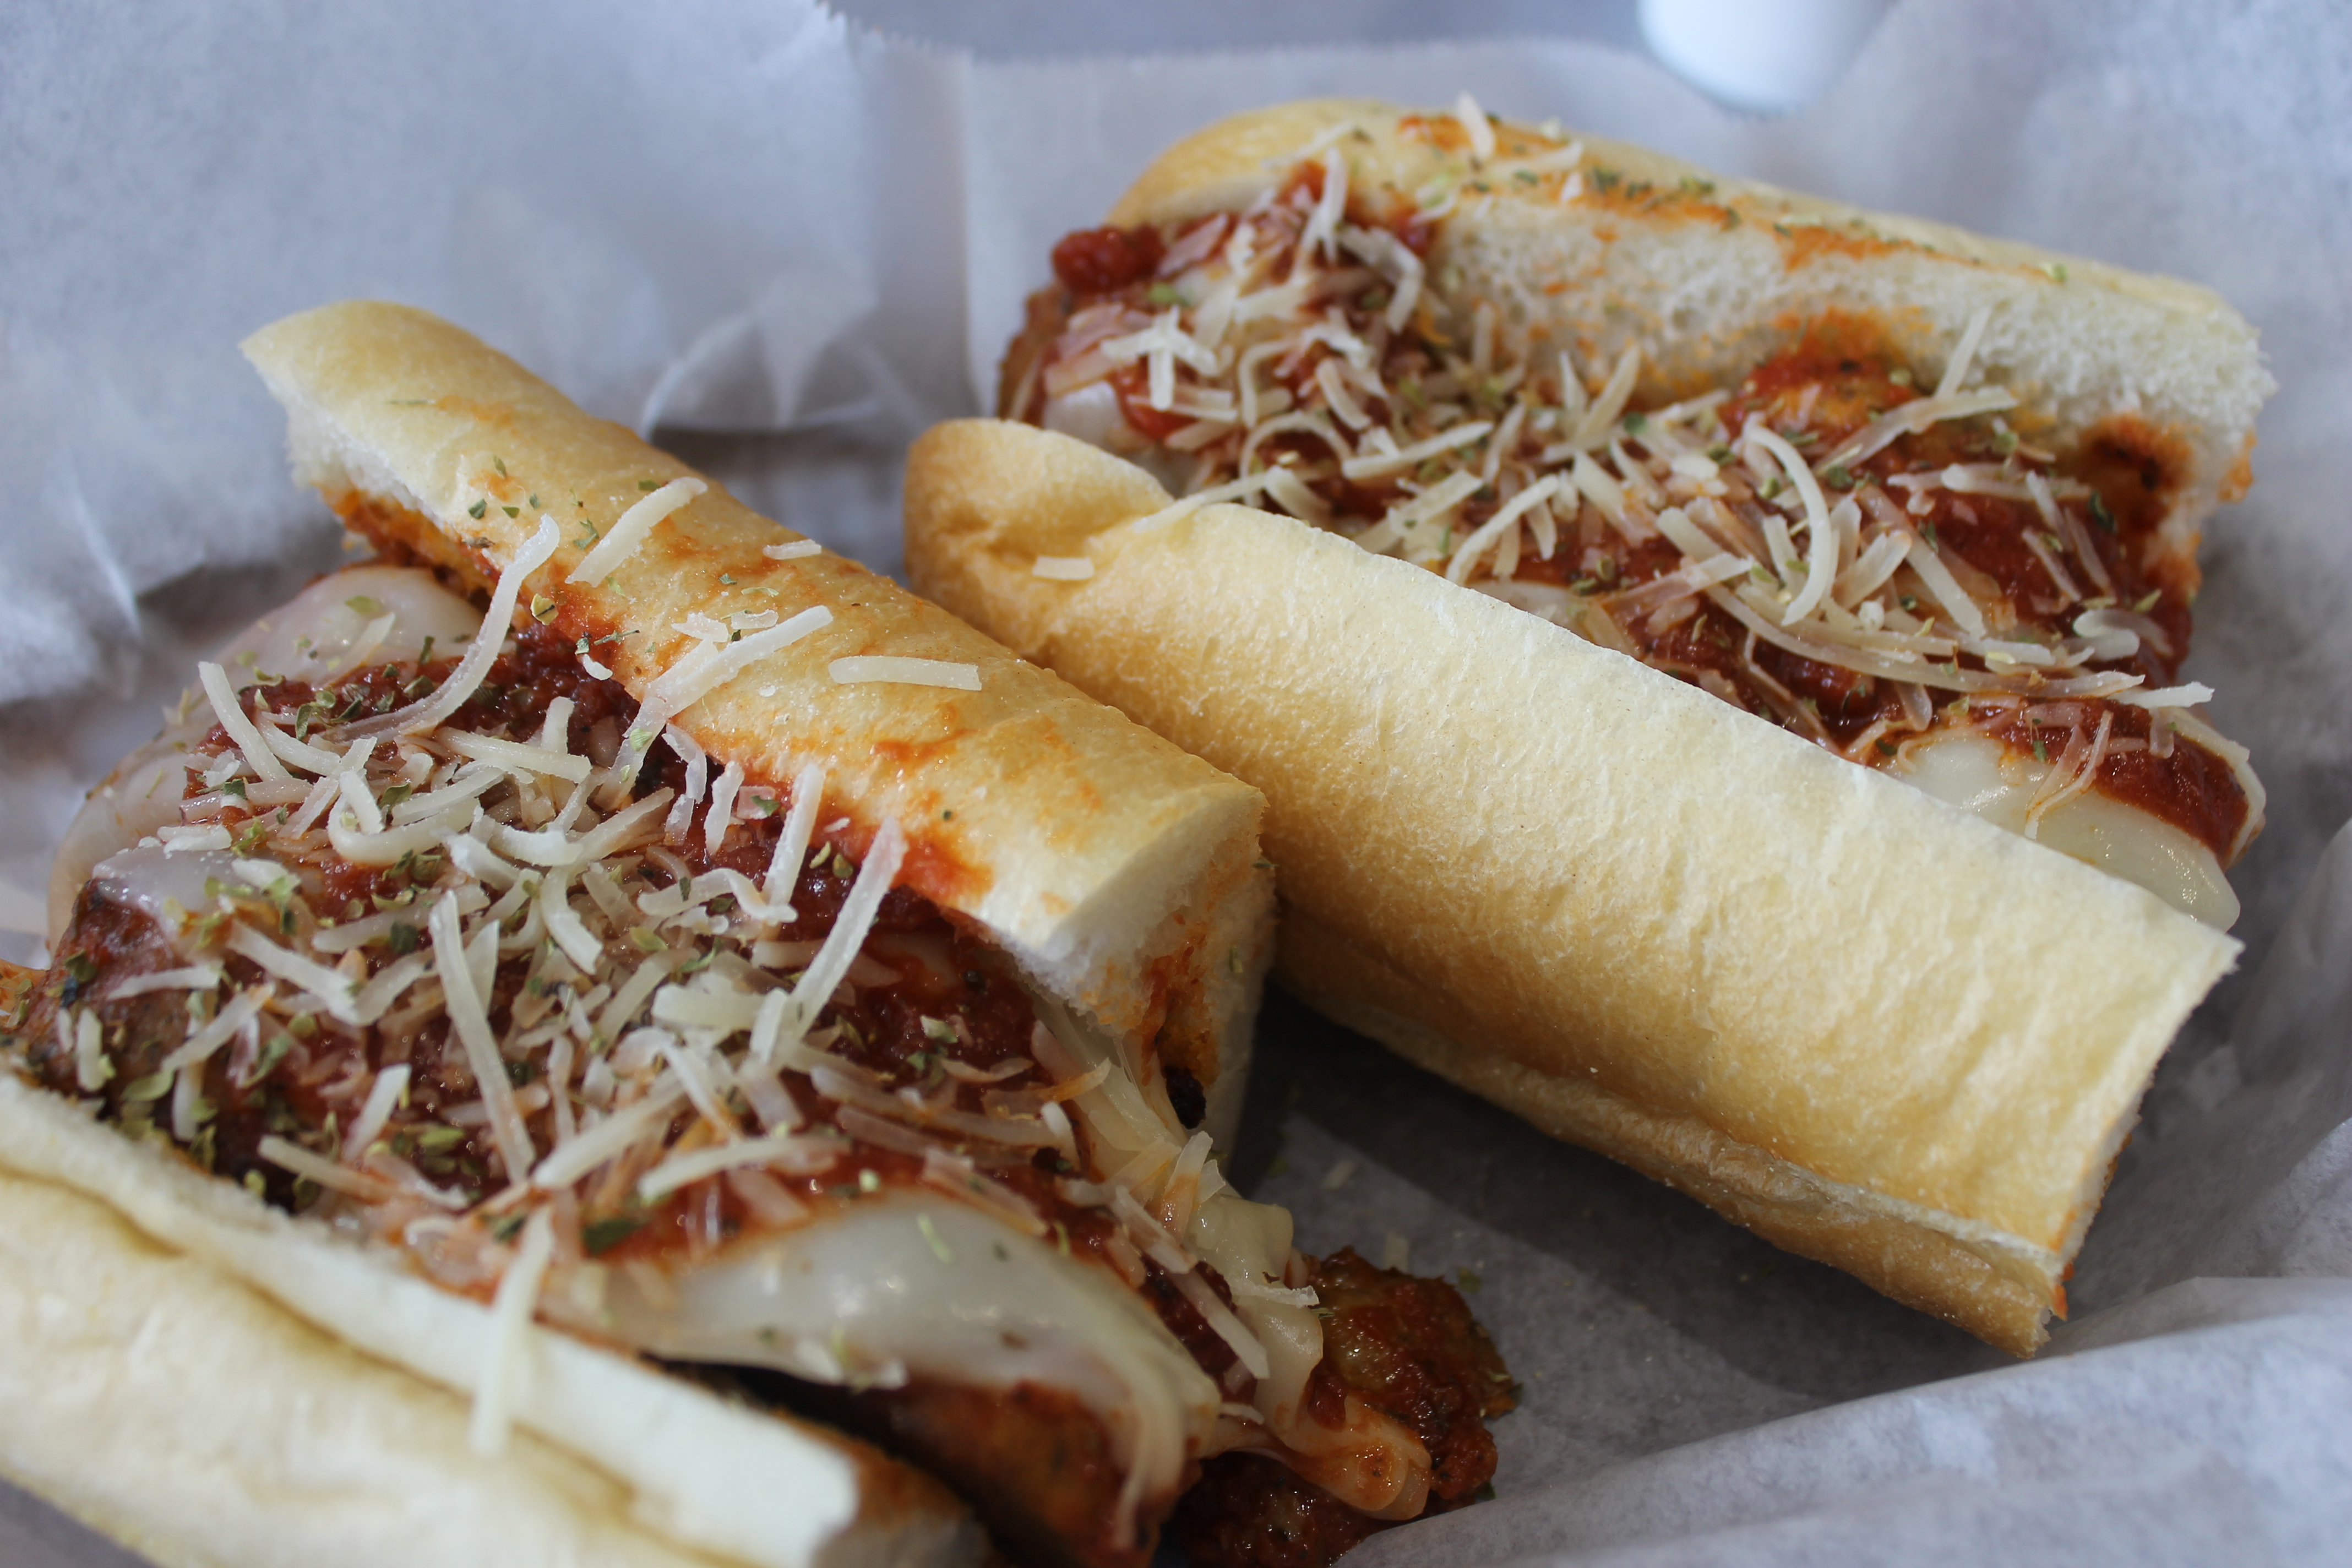 Meatball Parmesan - Our hoagie roll layered with provolone cheese, our homemade sauce topped with parmesan cheese and oregano.